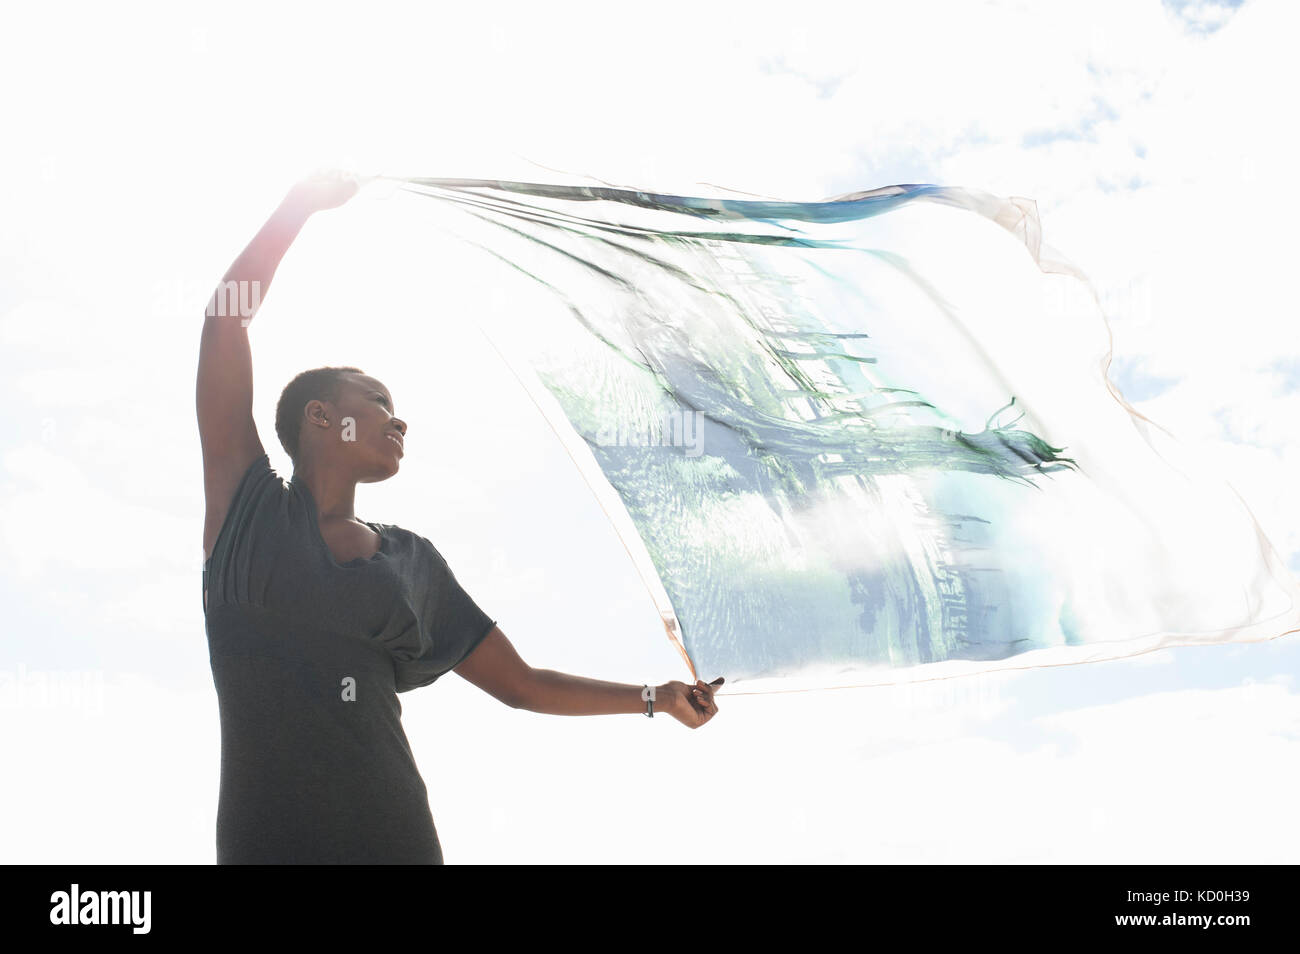 Portrait of young woman on beach, holding sheer scarf Stock Photo - Alamy